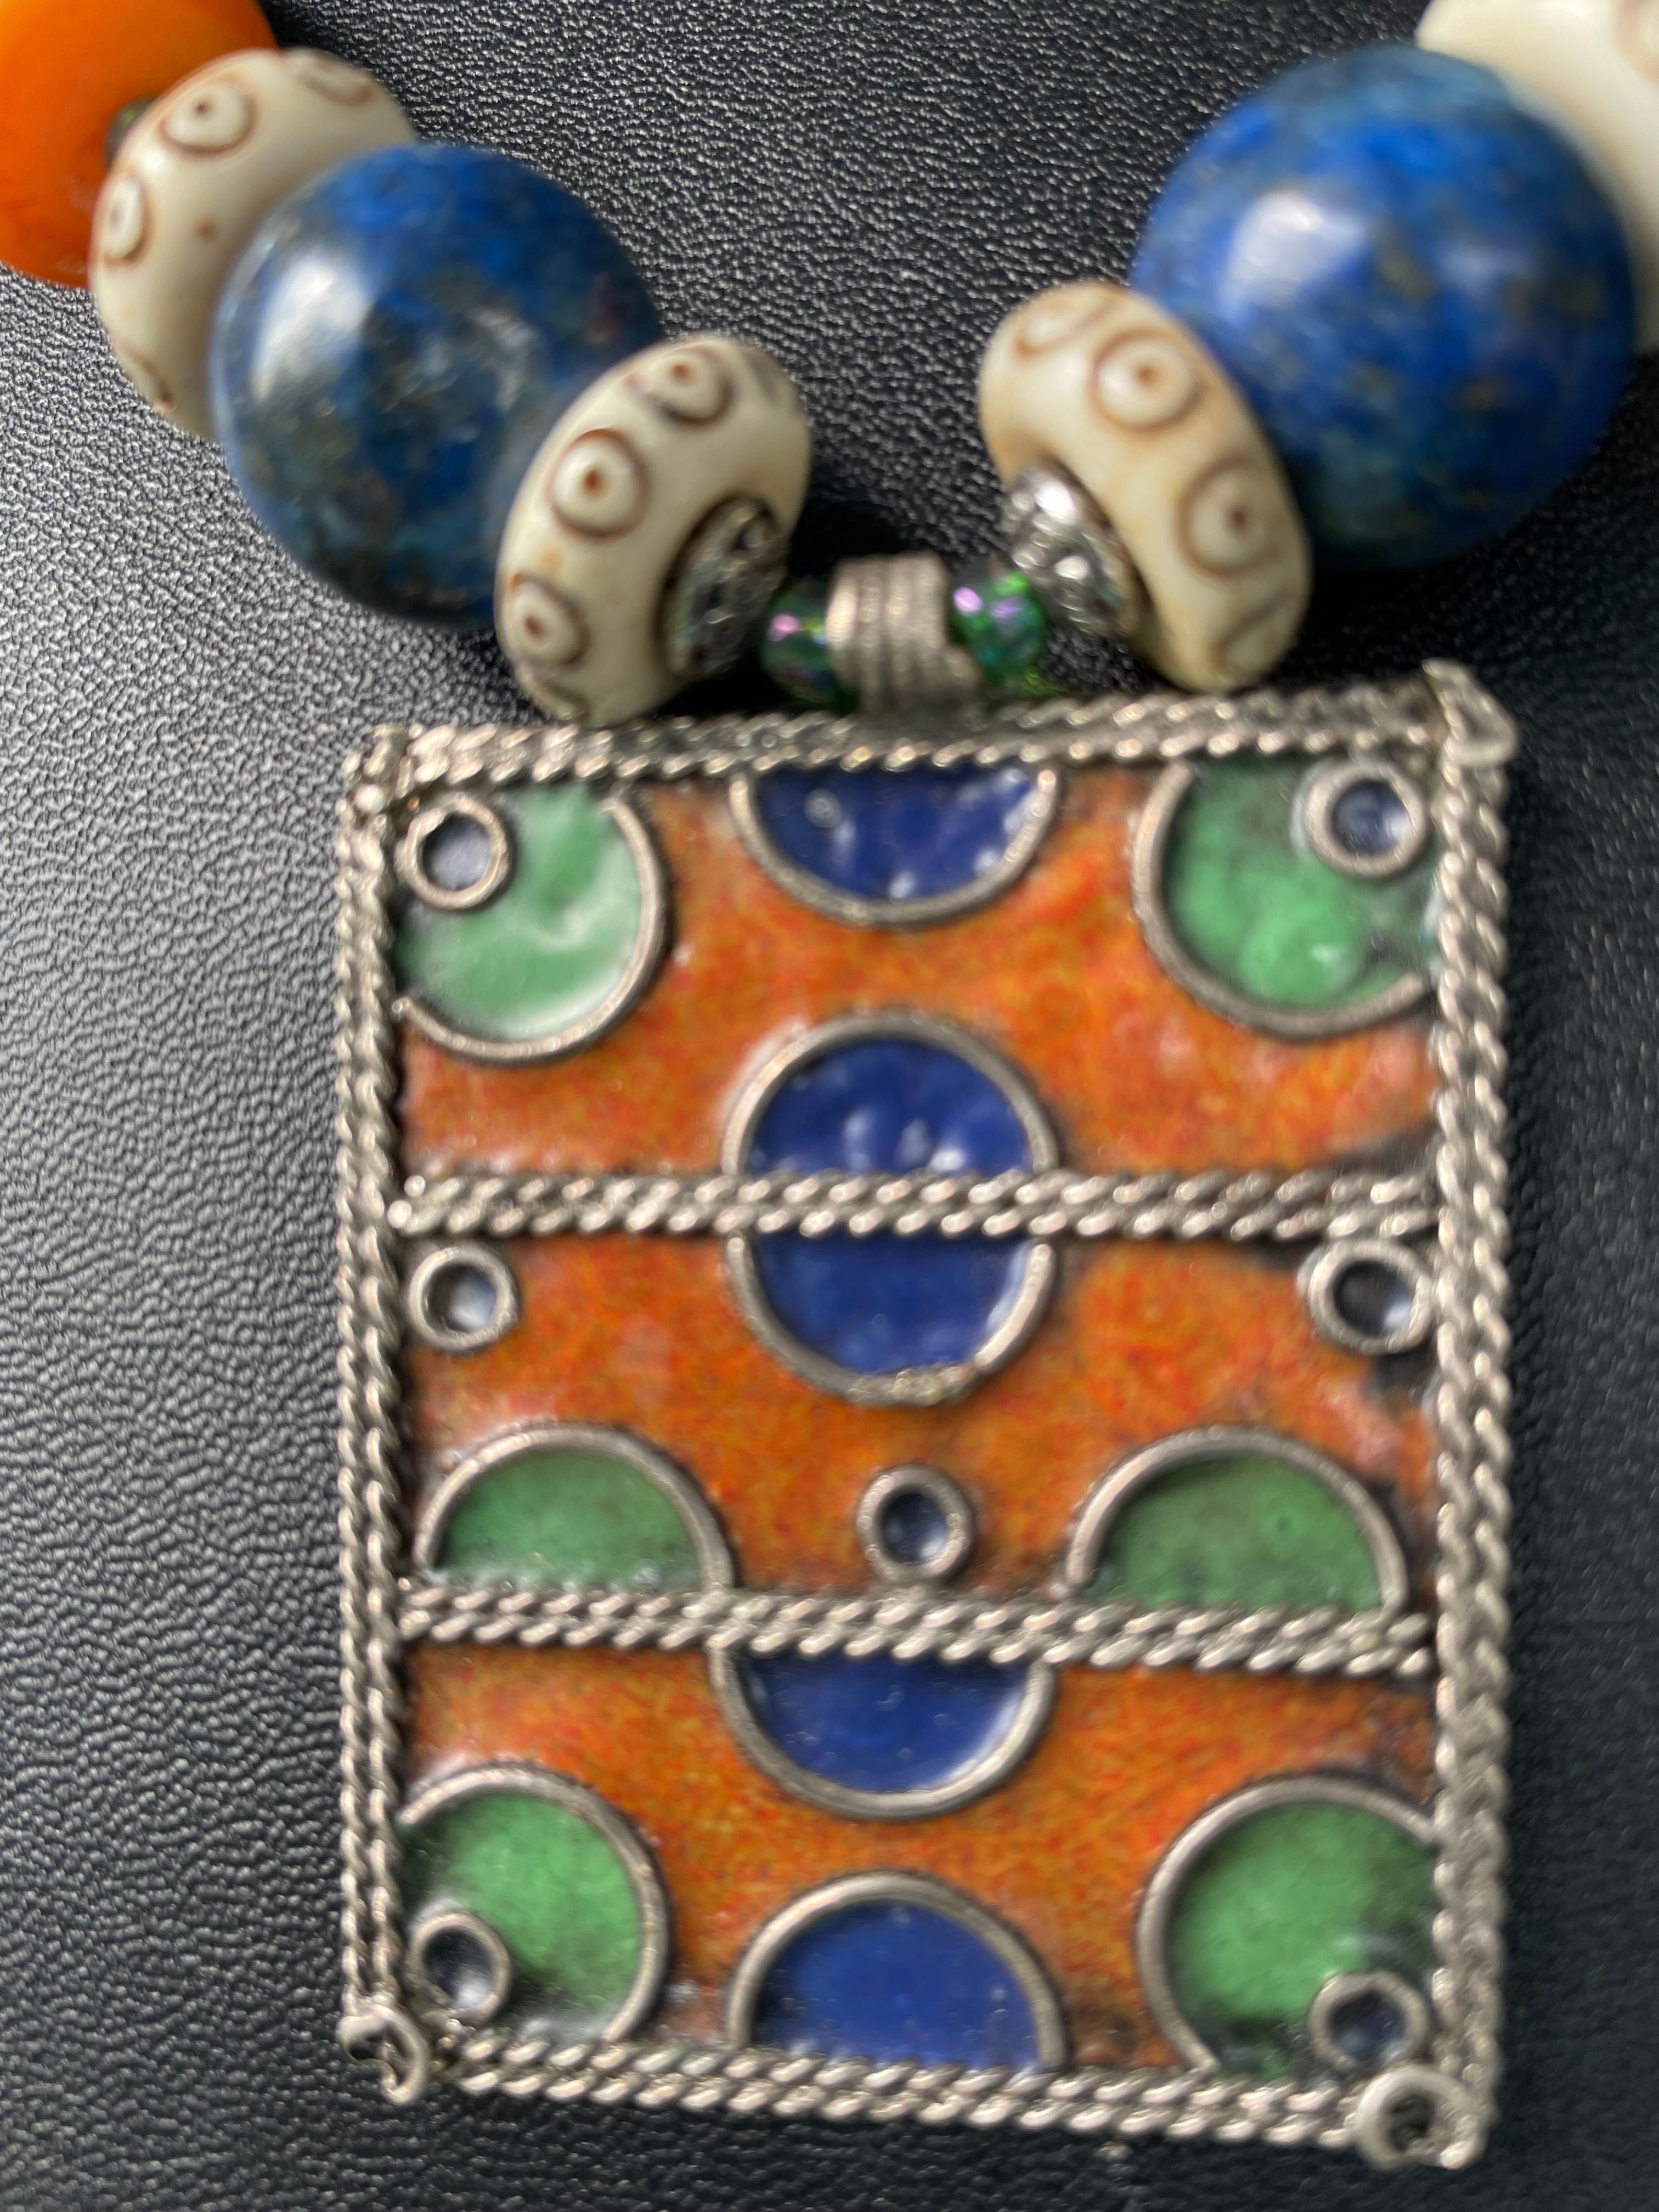 Lorraine’s Bijoux offers a Vintage Afghani Enamel
Tribal pendant necklace.This stunning pendant is a vintage (mid 20th century)piece from a personal collection accumulated during world travels.These pieces are worn by tribal women
For festivals etc.